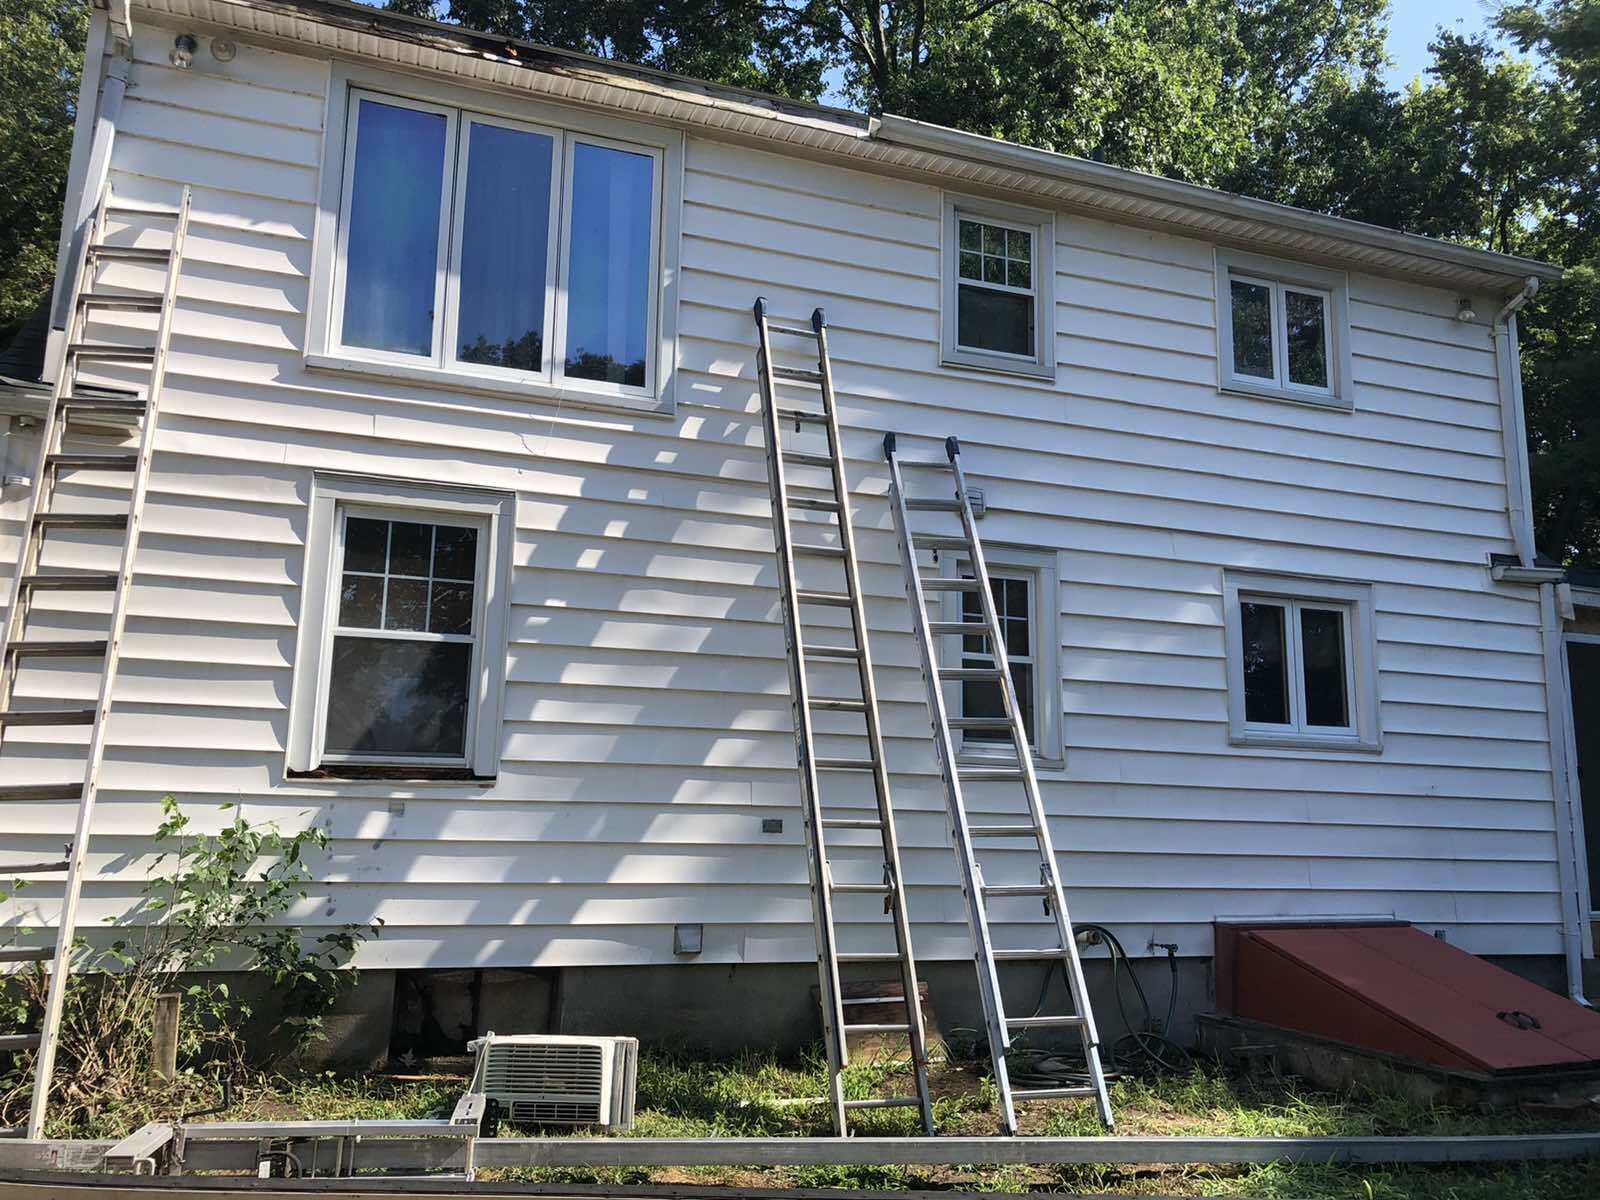 Weathered aluminum siding from the New England weather. Ready to be replaced with new vinyl siding.